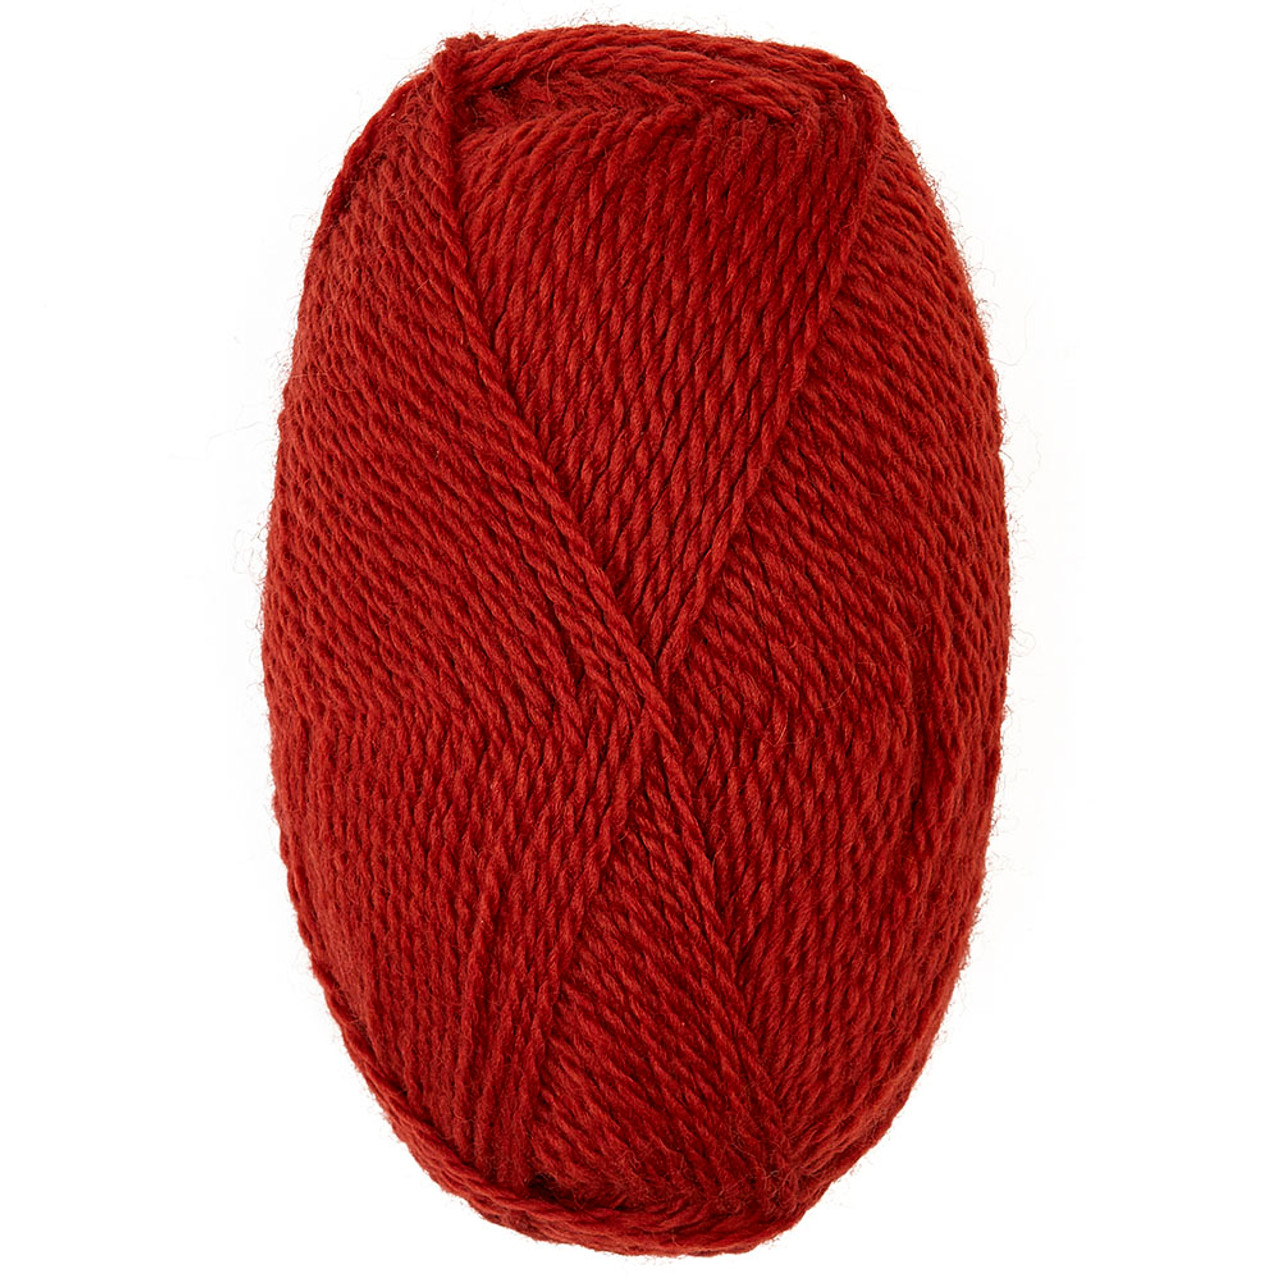 Independent Study in Red on Targhee Wool Worsted Yarn - 230 yd/100 g